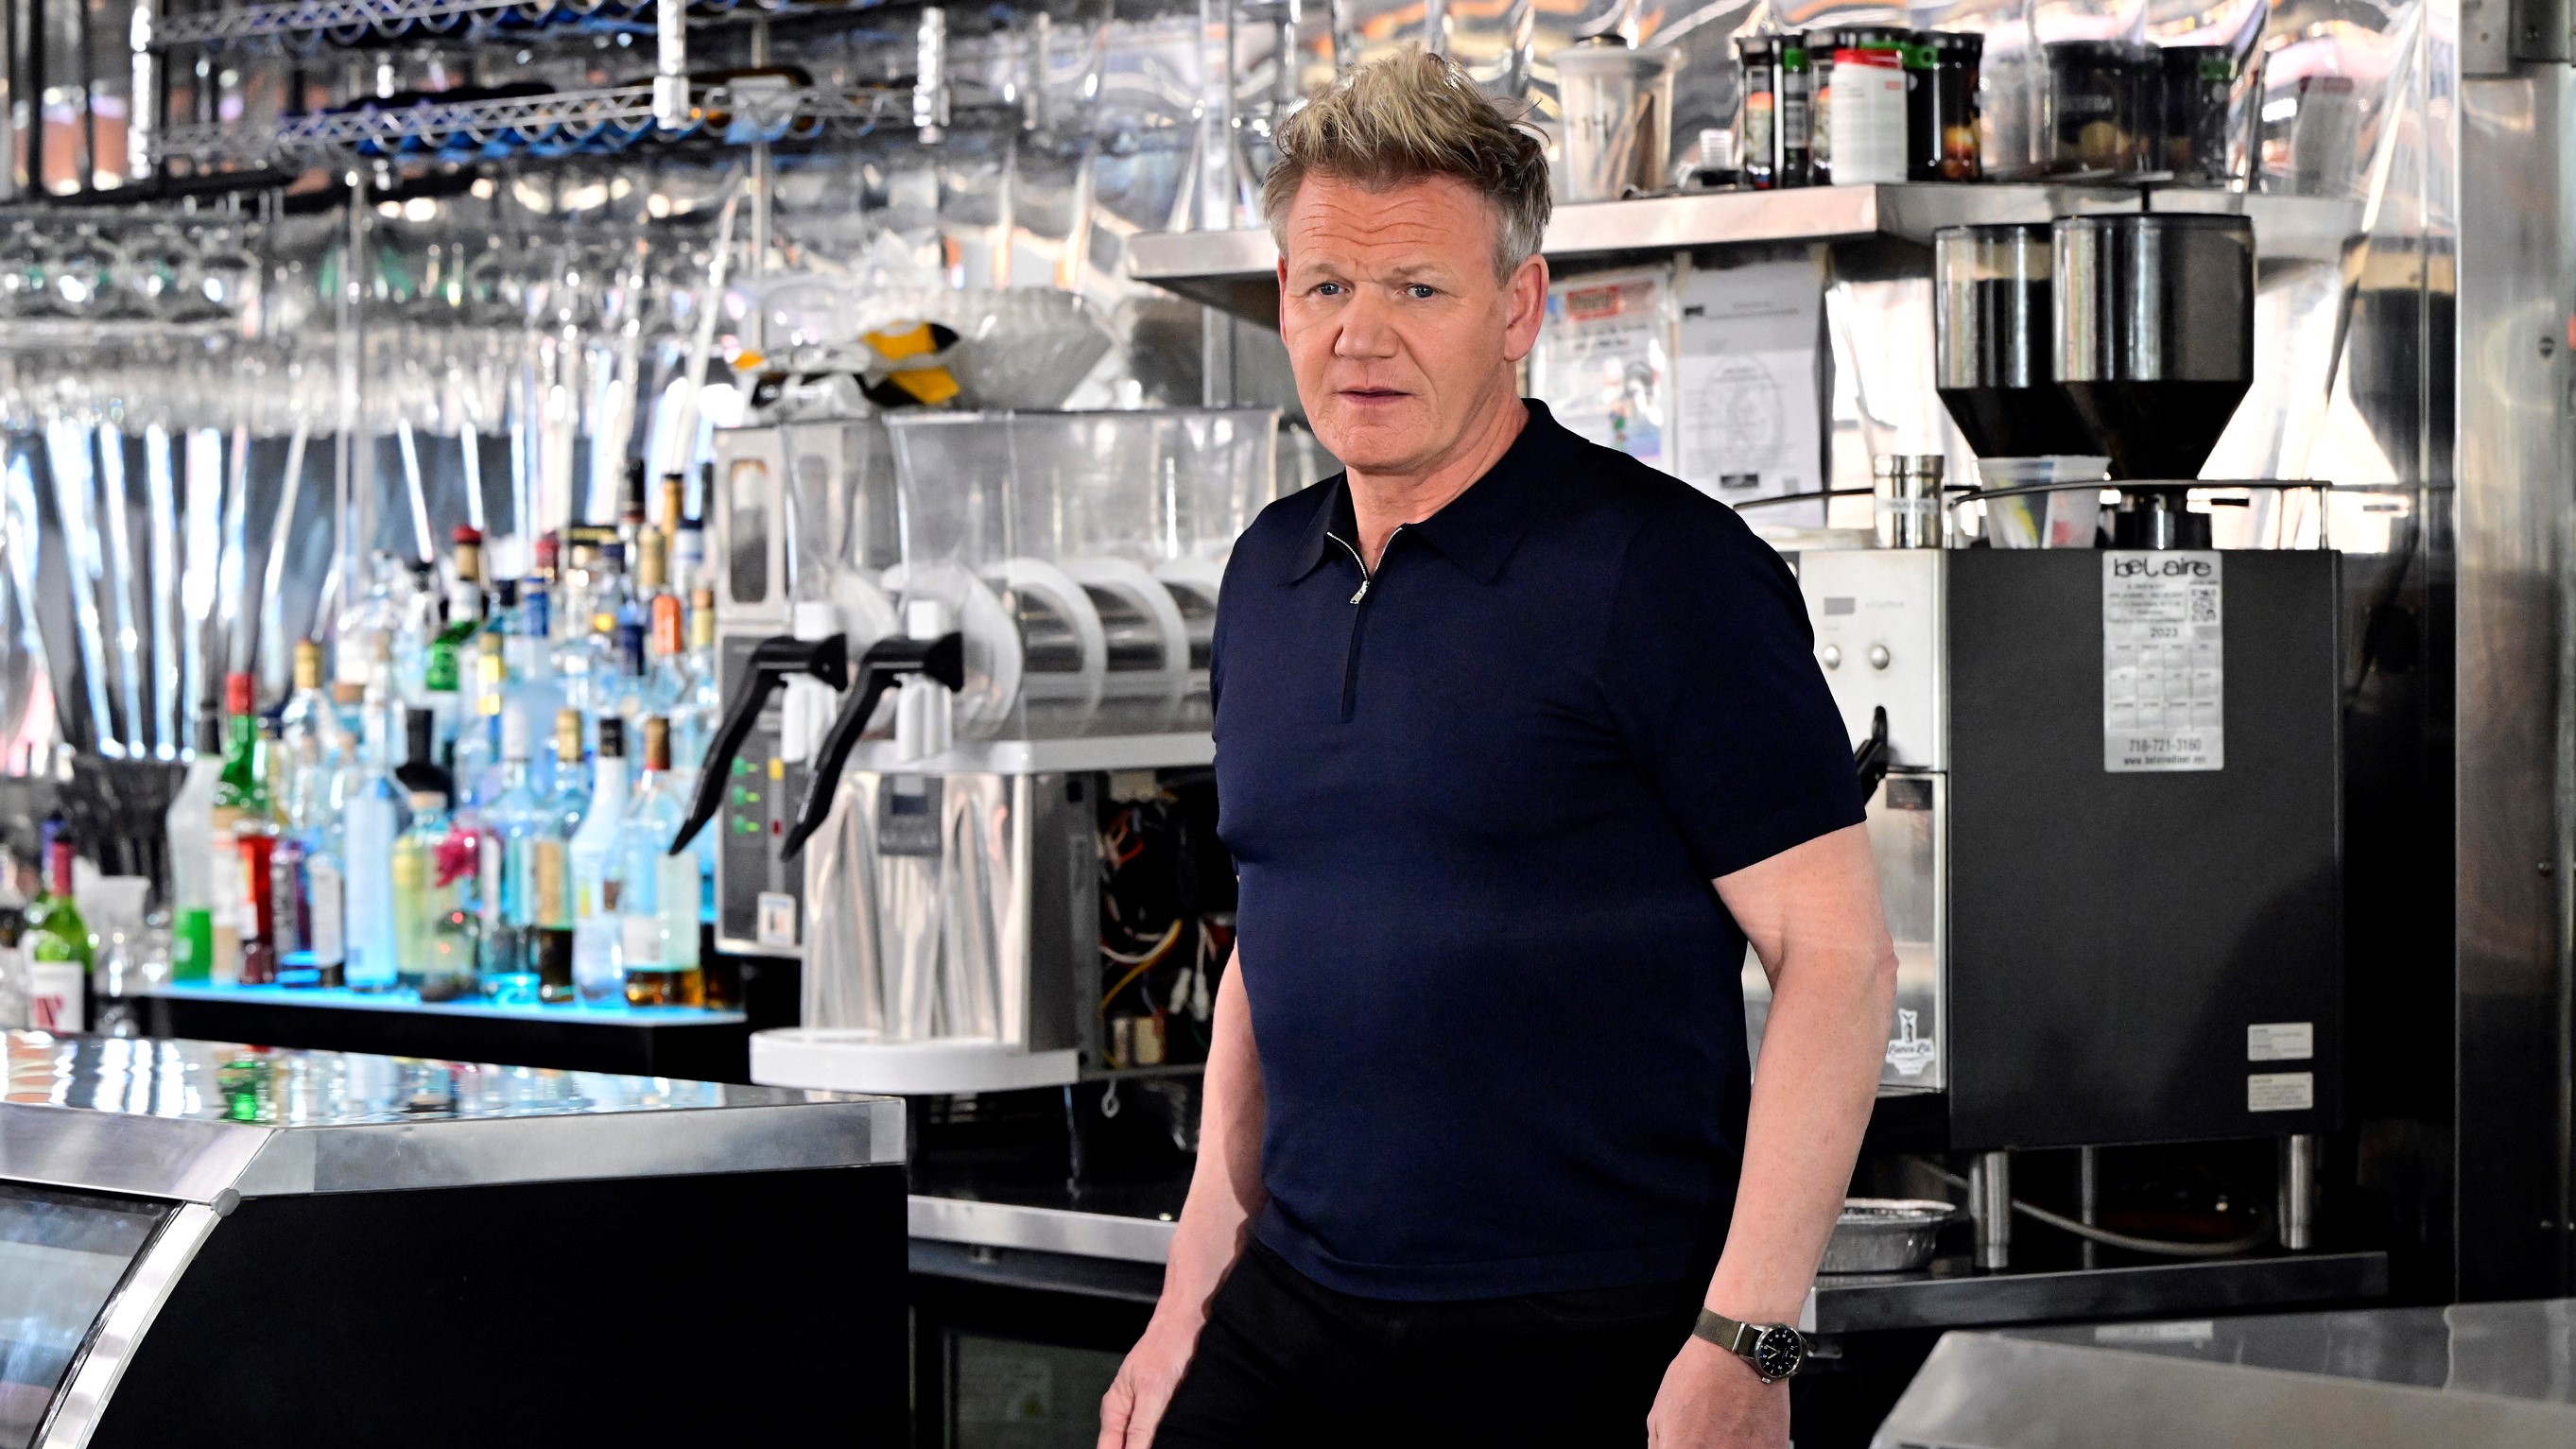 Kitchen Nightmares season 8 release date and what we know Arts Tribune